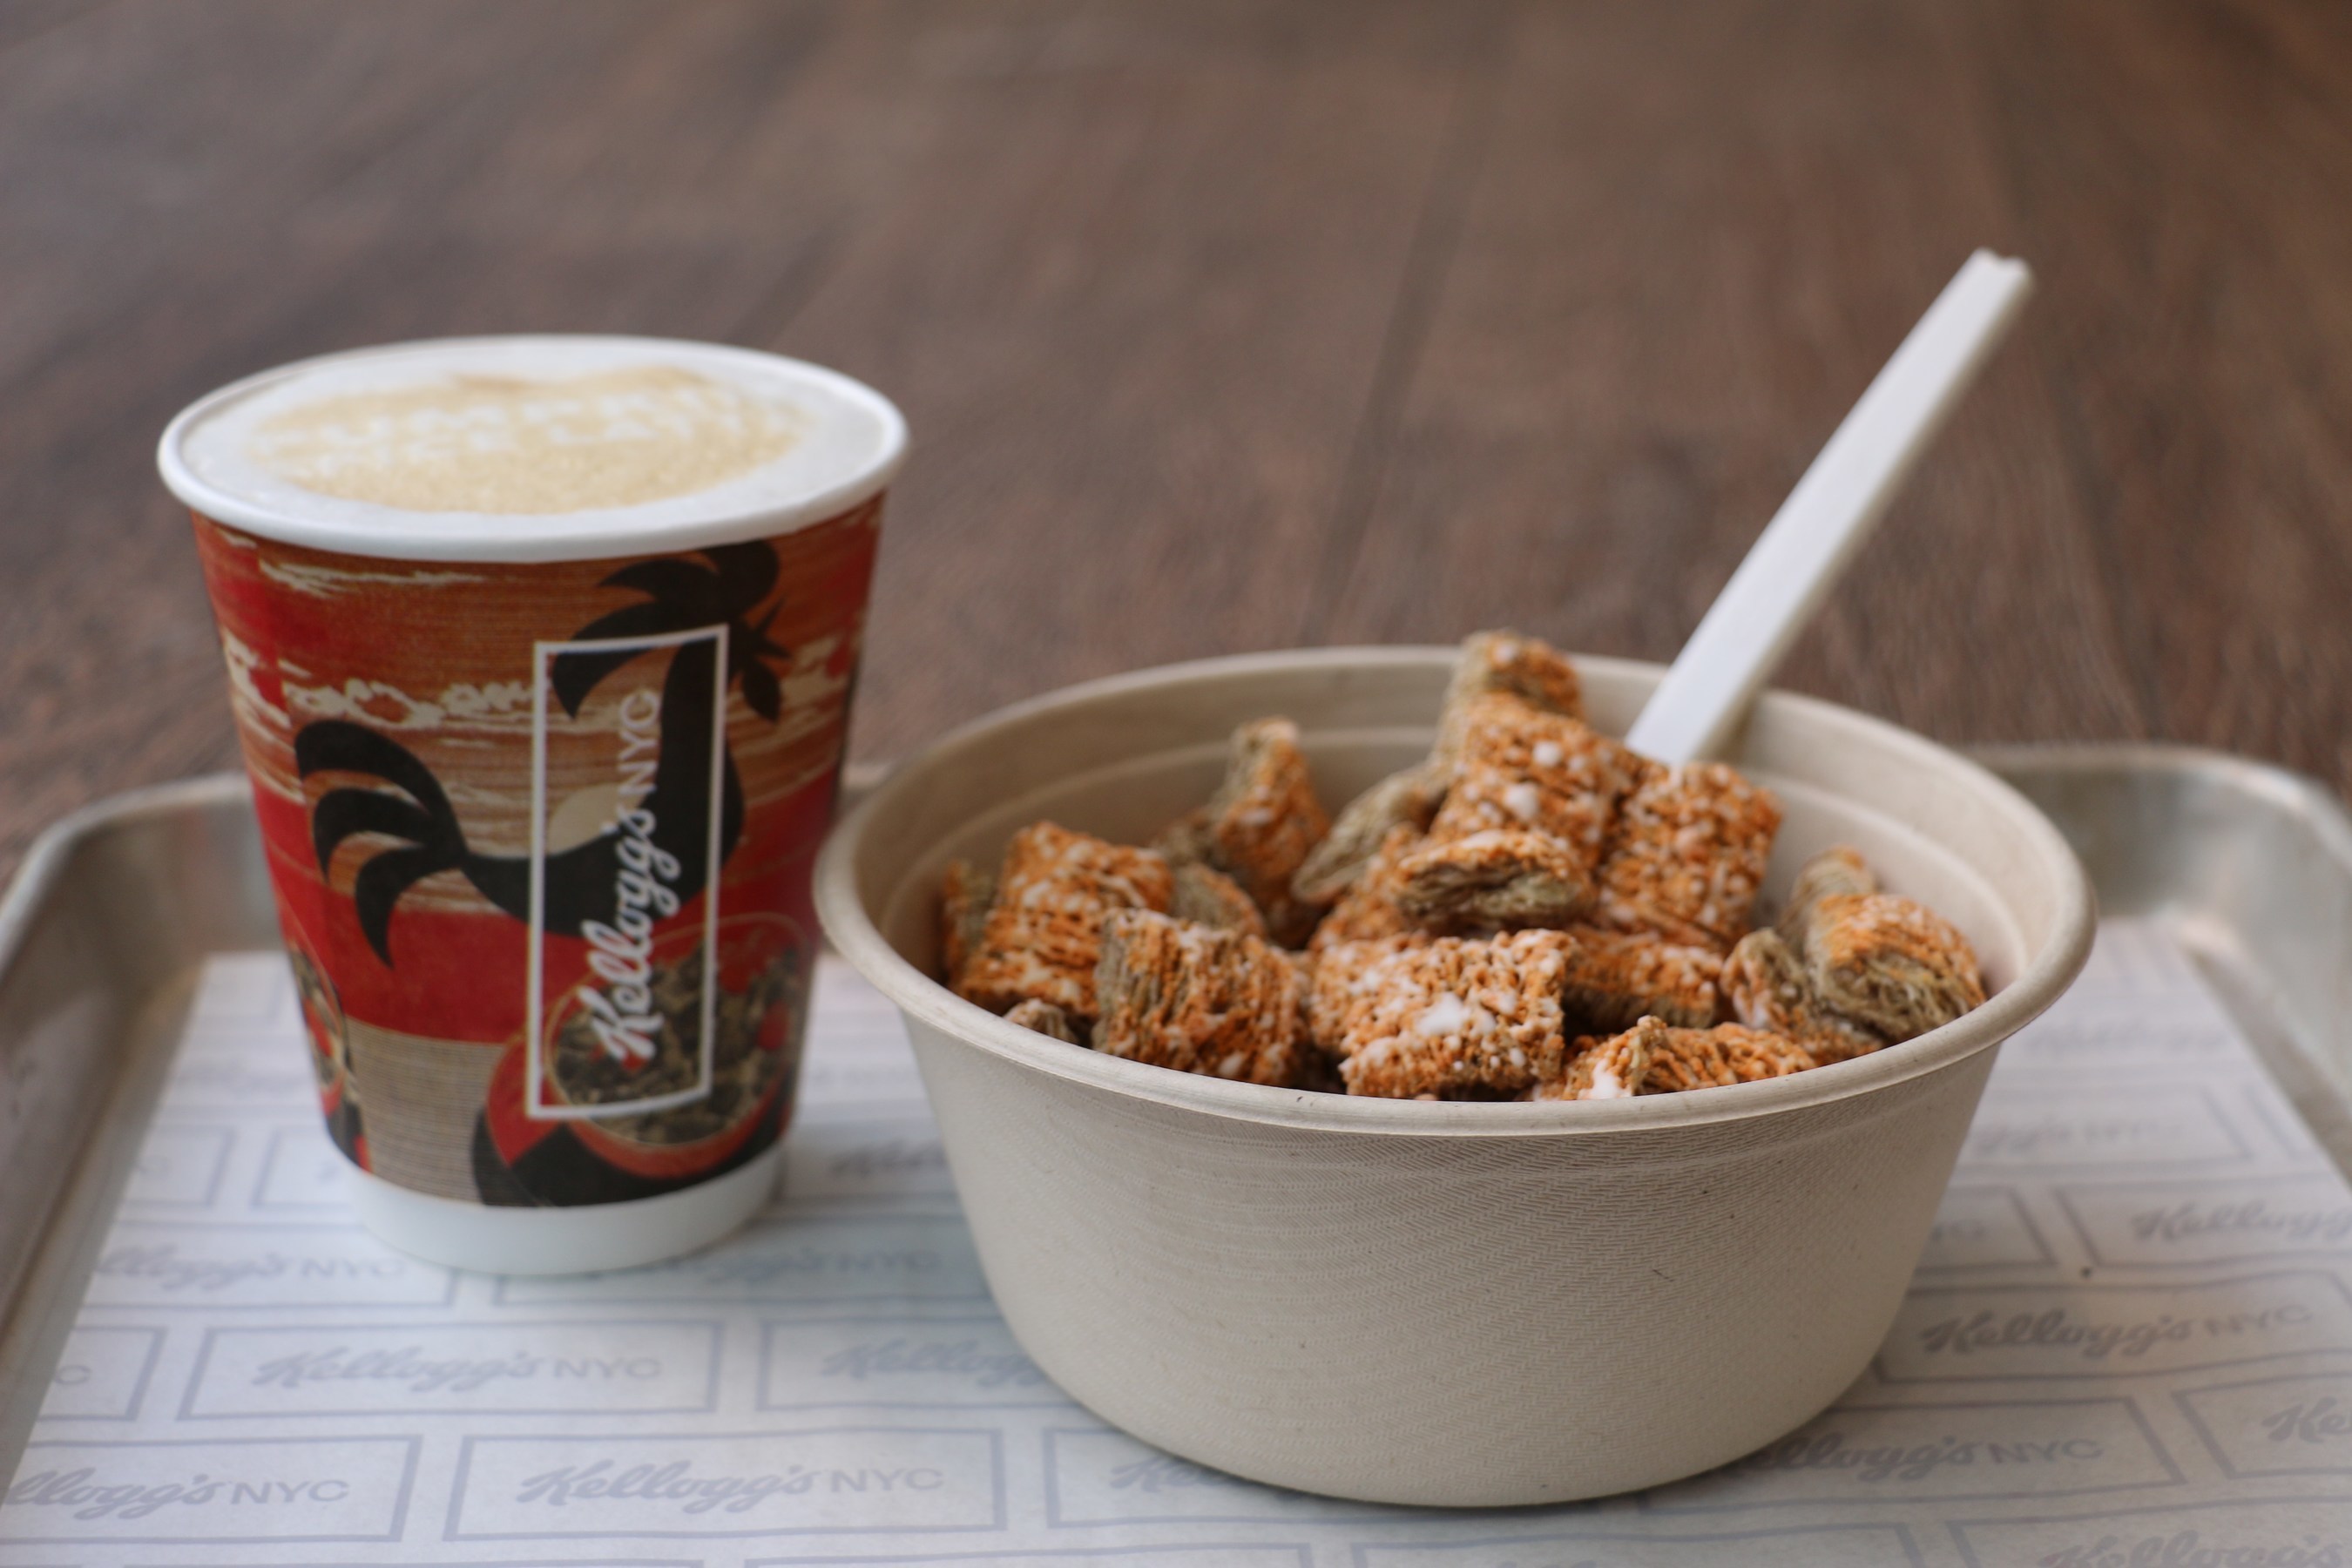 The Pumpkin Spice Latte Bowl, featuring Kellogg's Frosted Mini-Wheats Pumpkin Spice, is available at Kellogg's NYC starting September 6.